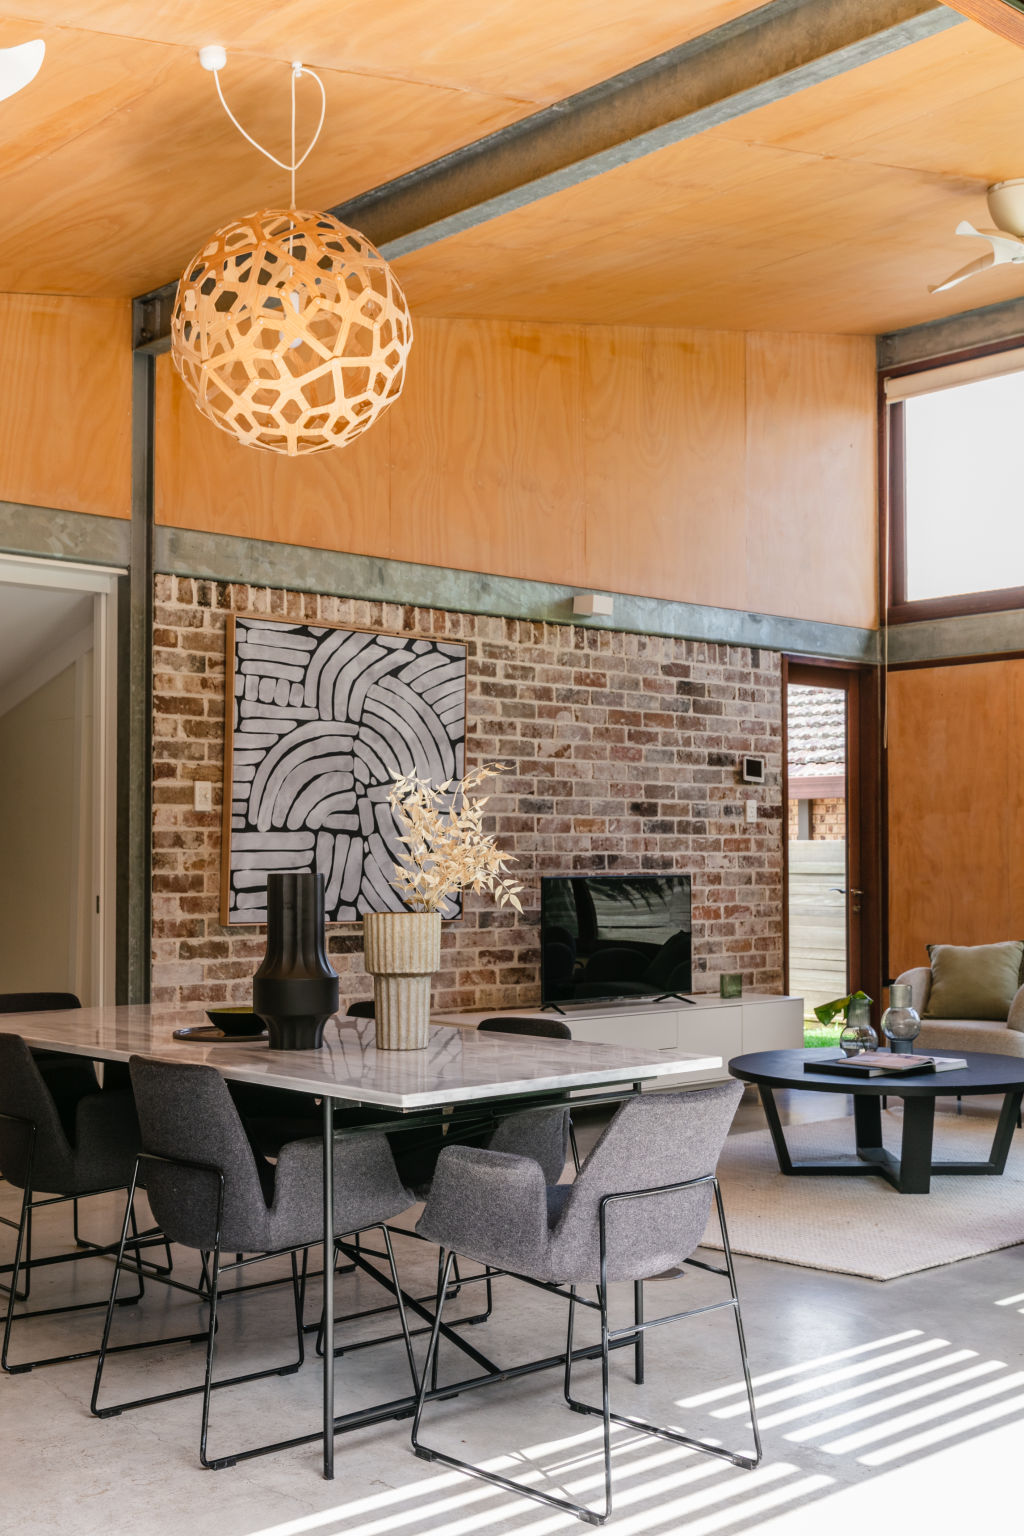 The open-plan living area was sustainably designed and made. Photo: Moss & co